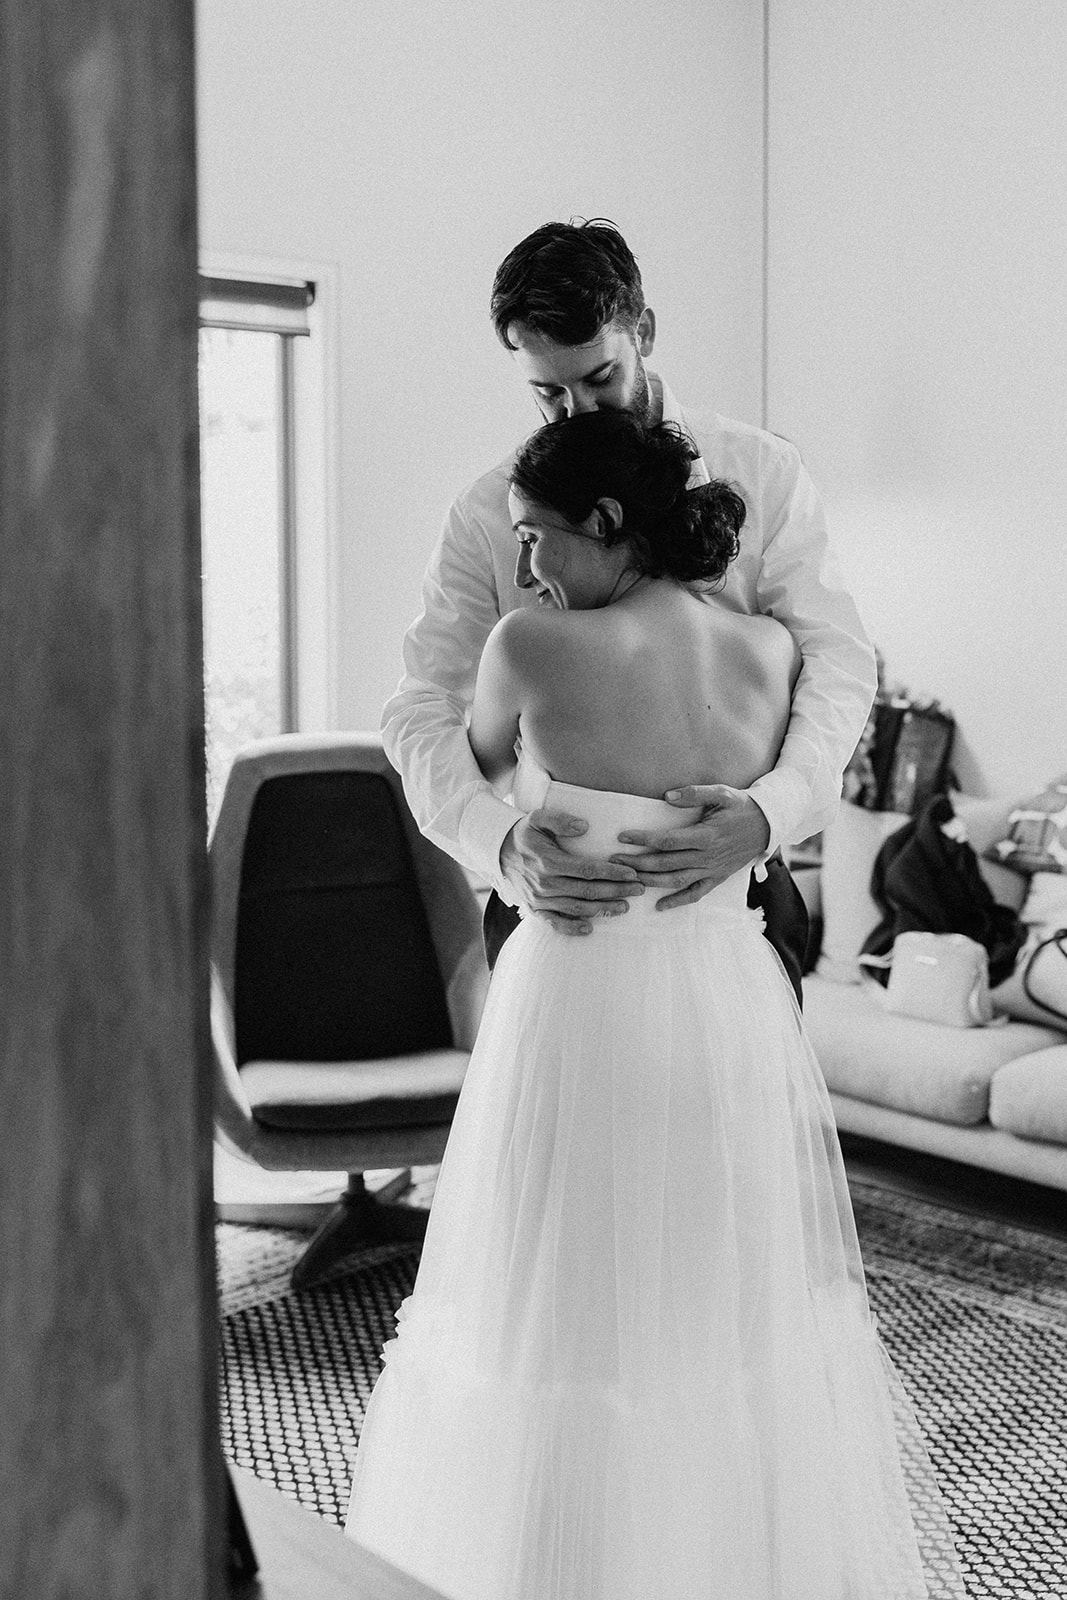 bride and groom have a hug in the lounge room while getting ready